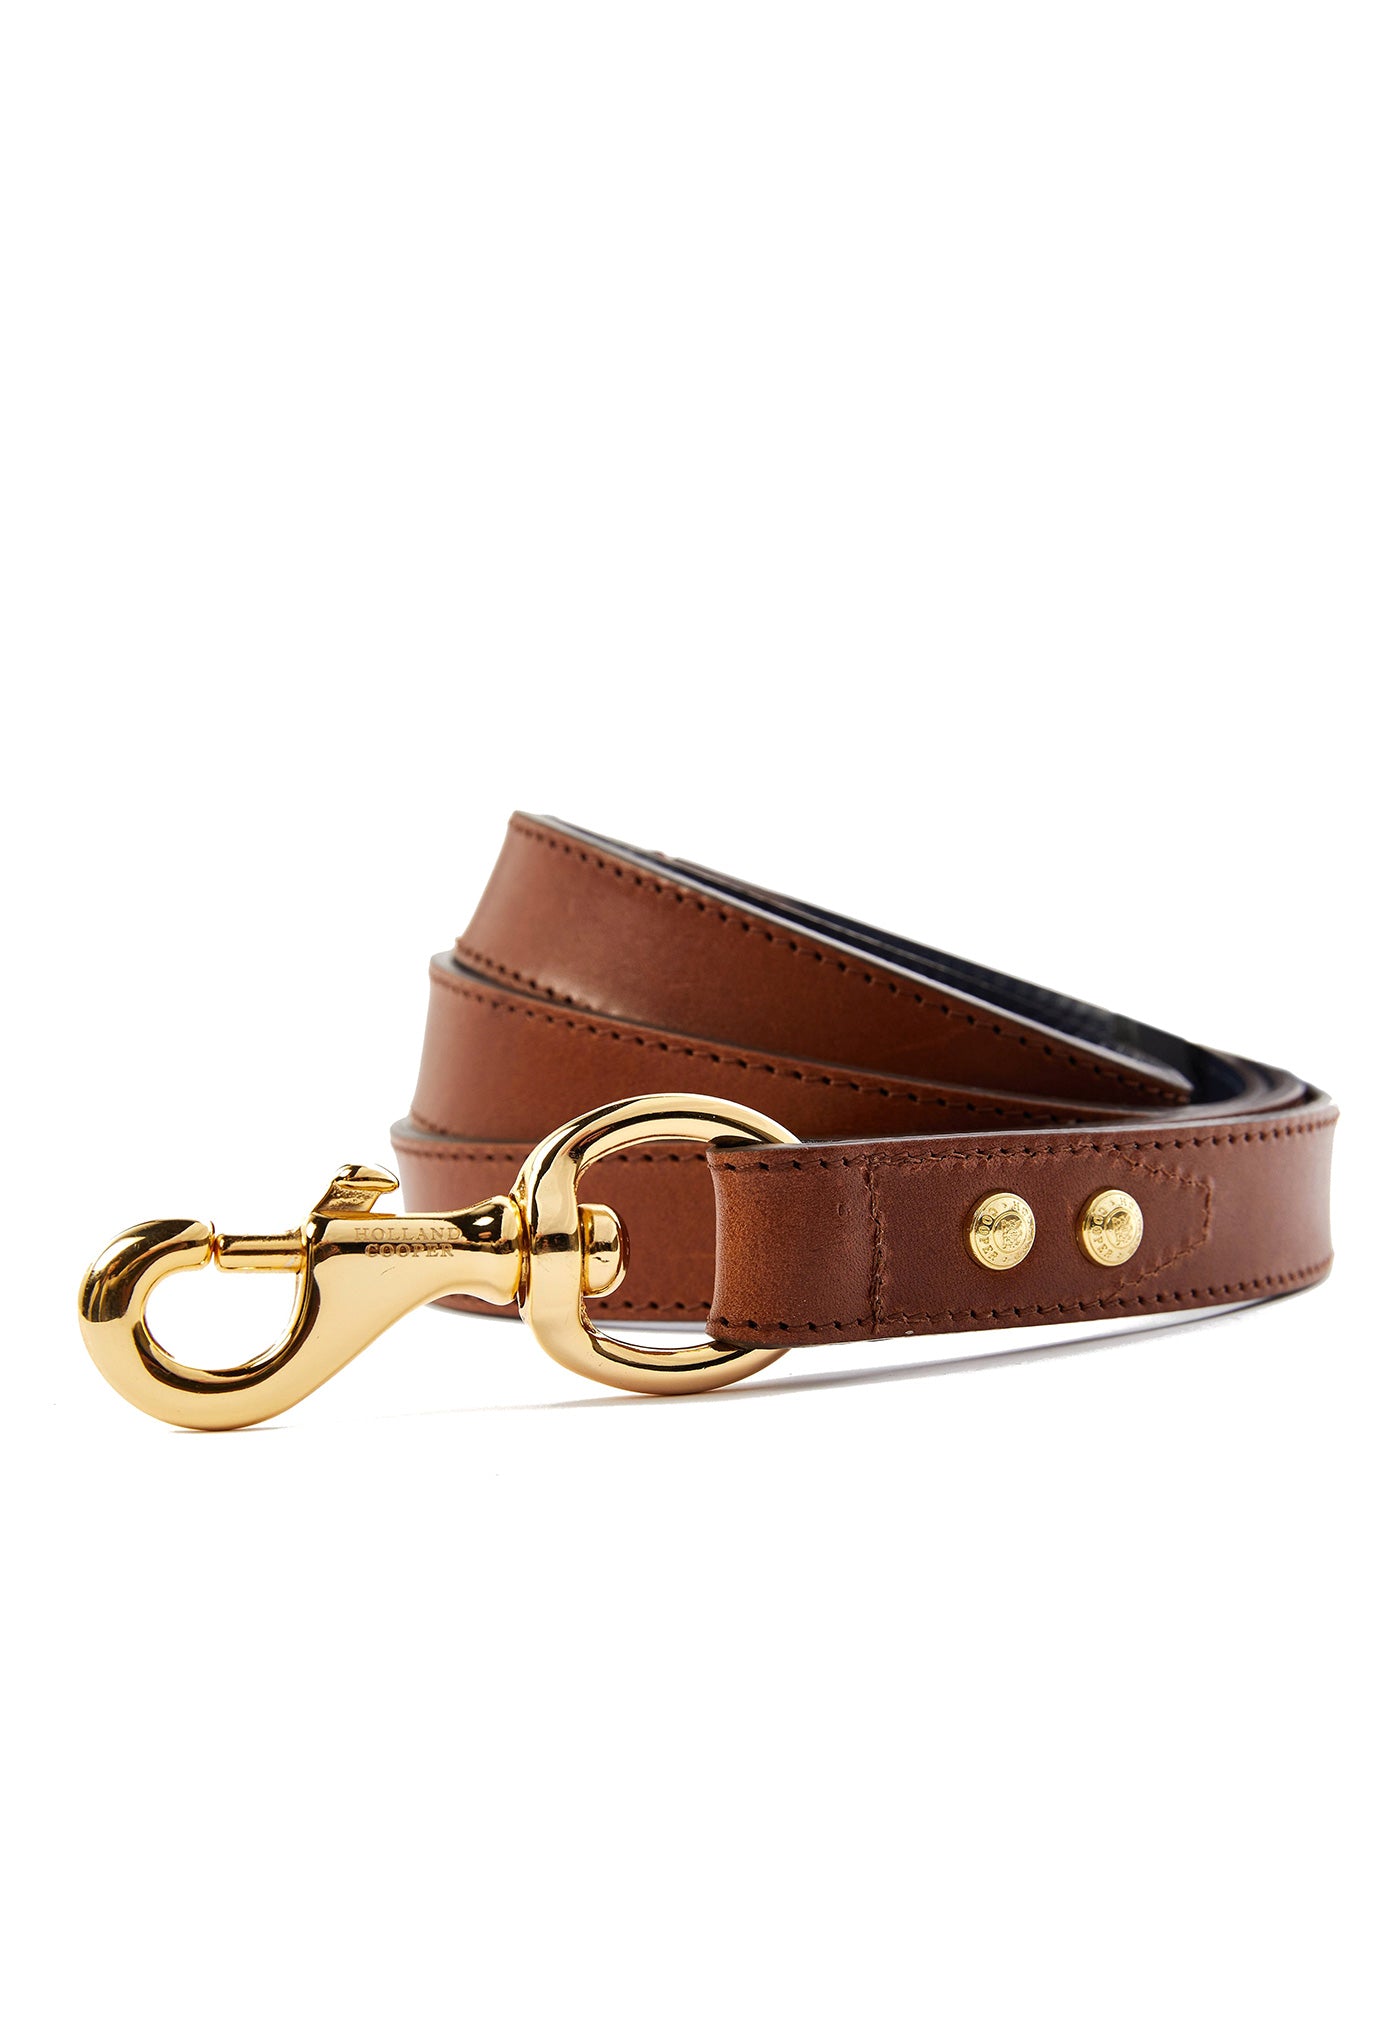 Classic Dog Lead - Chestnut sold by Angel Divine